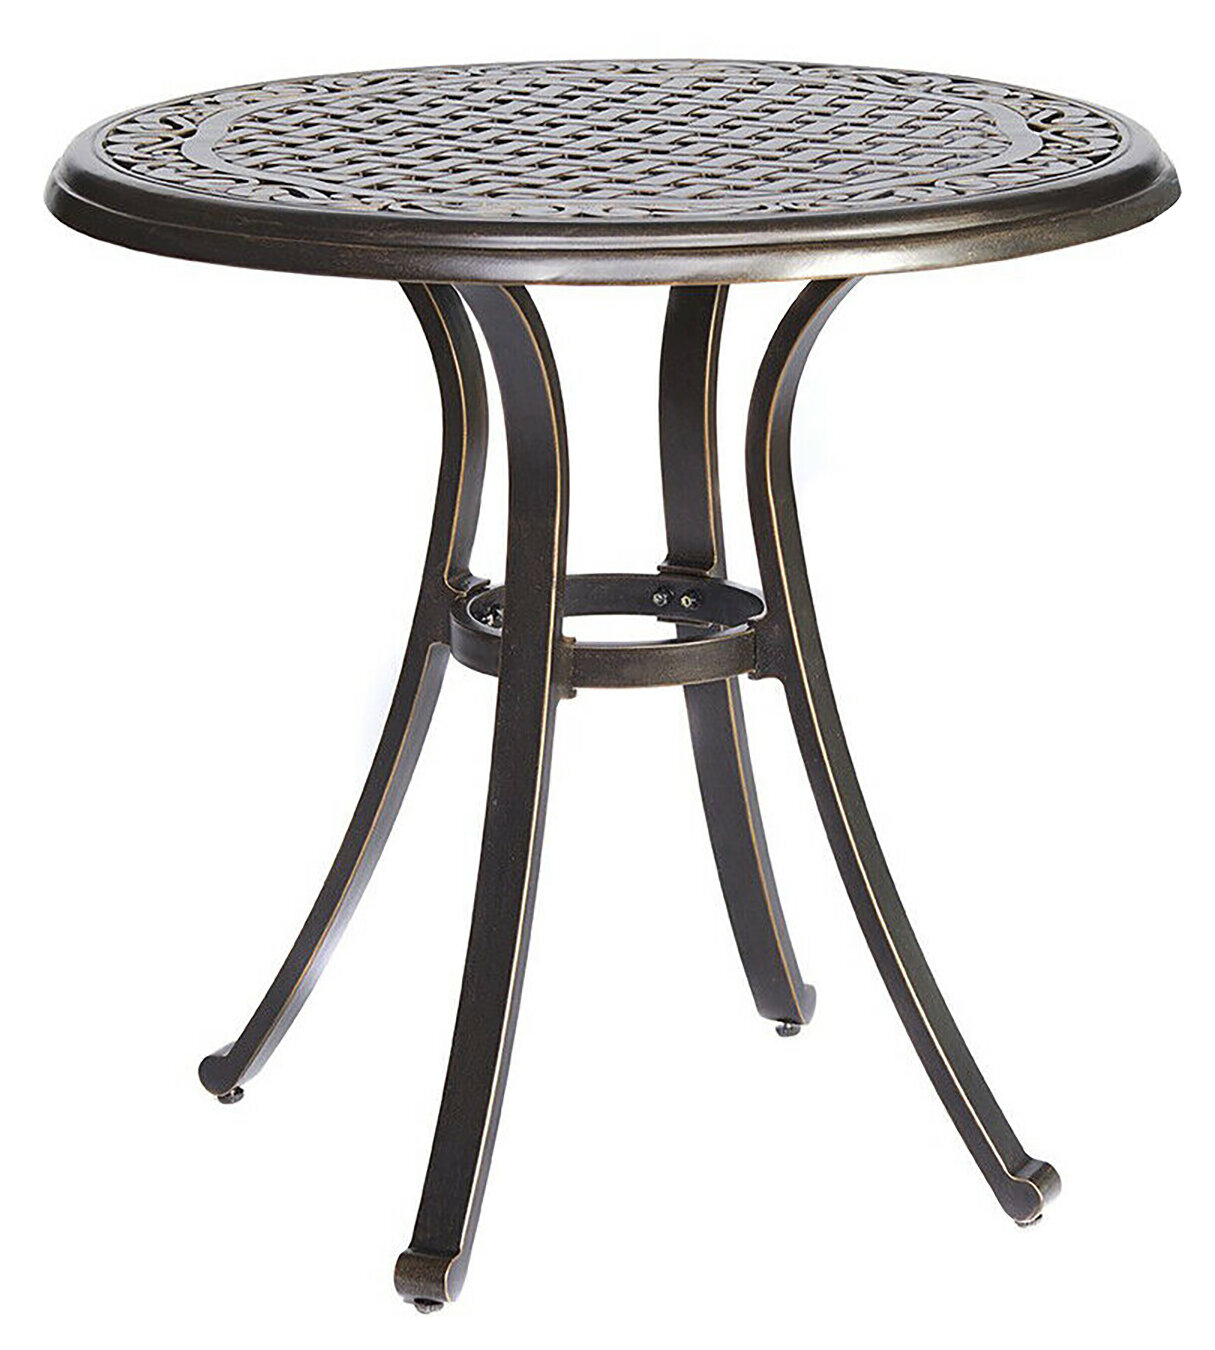 Black Bar Table Round Metal Bistro Table Iron Black Industrial Design Space Saving Compact 